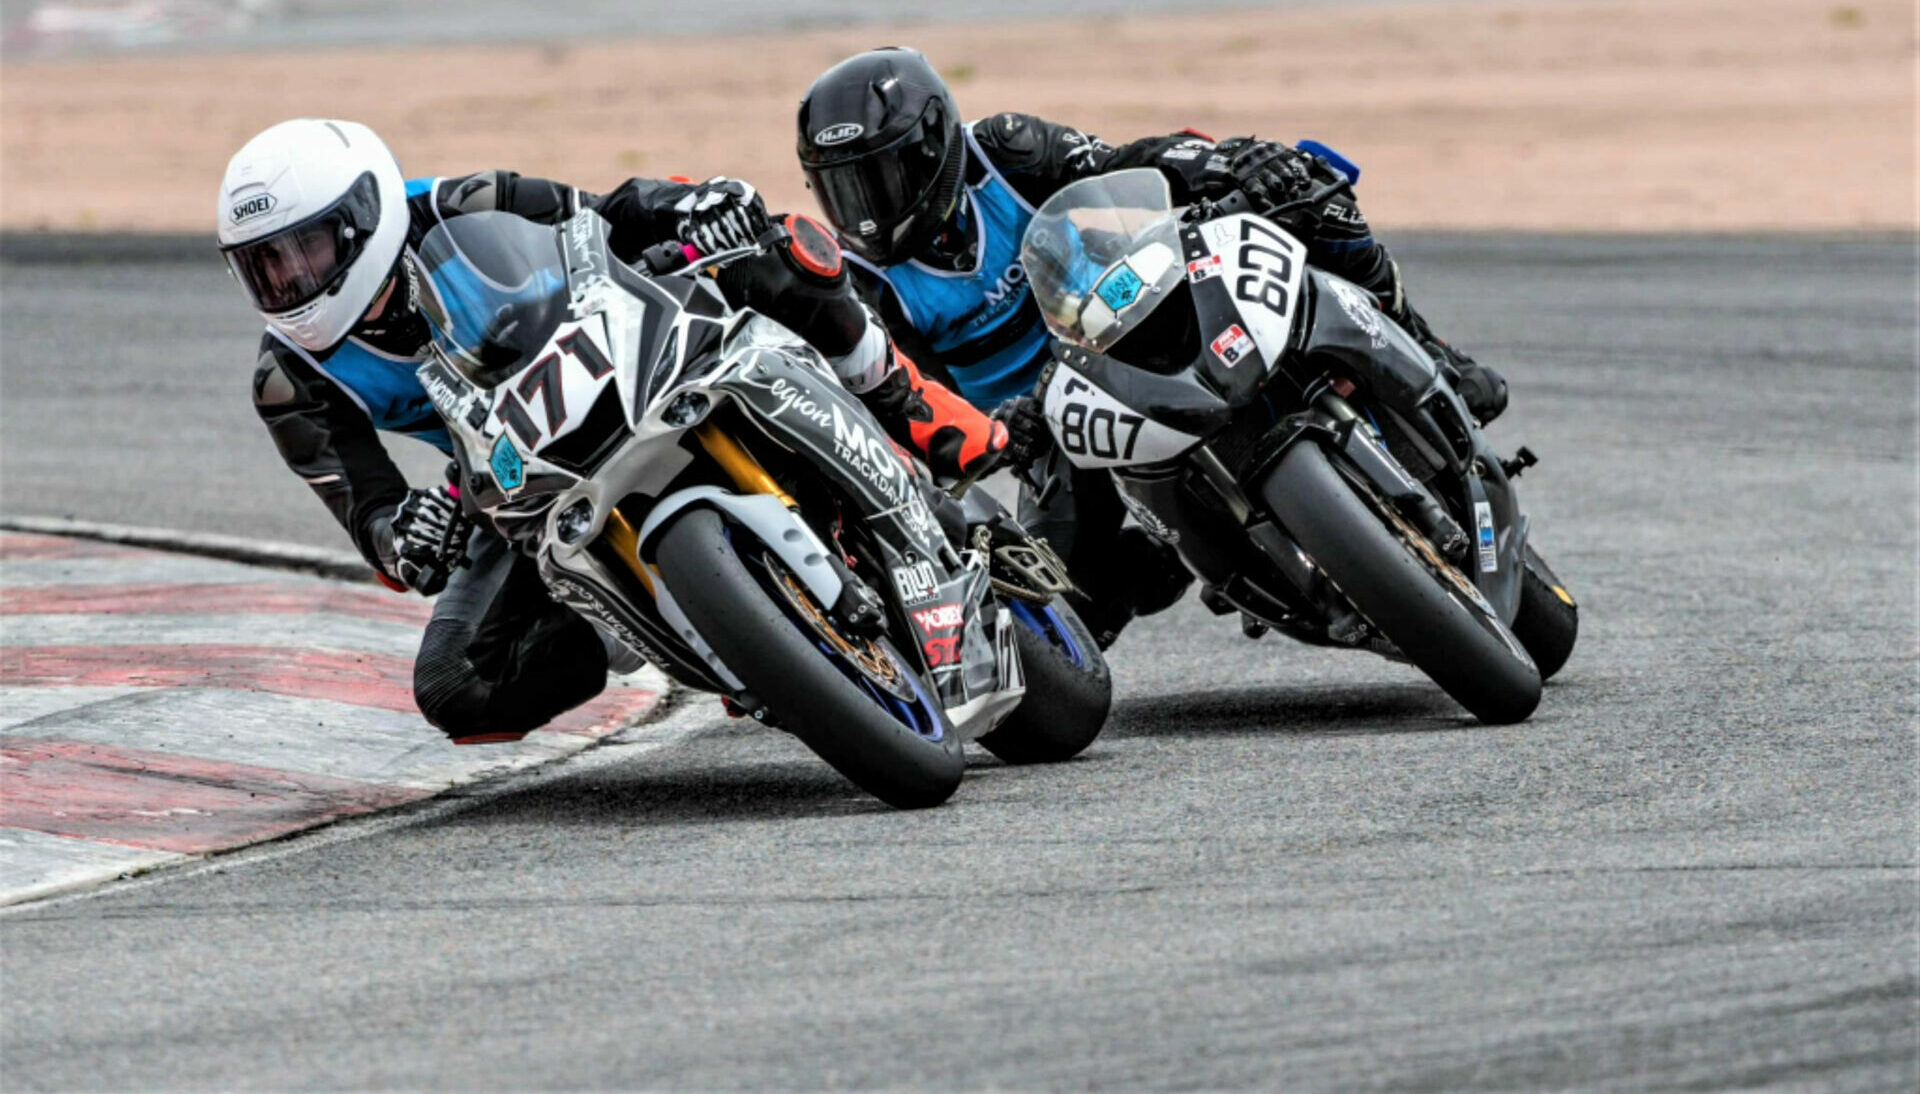 Action from a Legion Moto track day at Pikes Peak International Raceway earlier this year. Photo by Kelly Vernell, courtesy Legion Moto Trackdays.